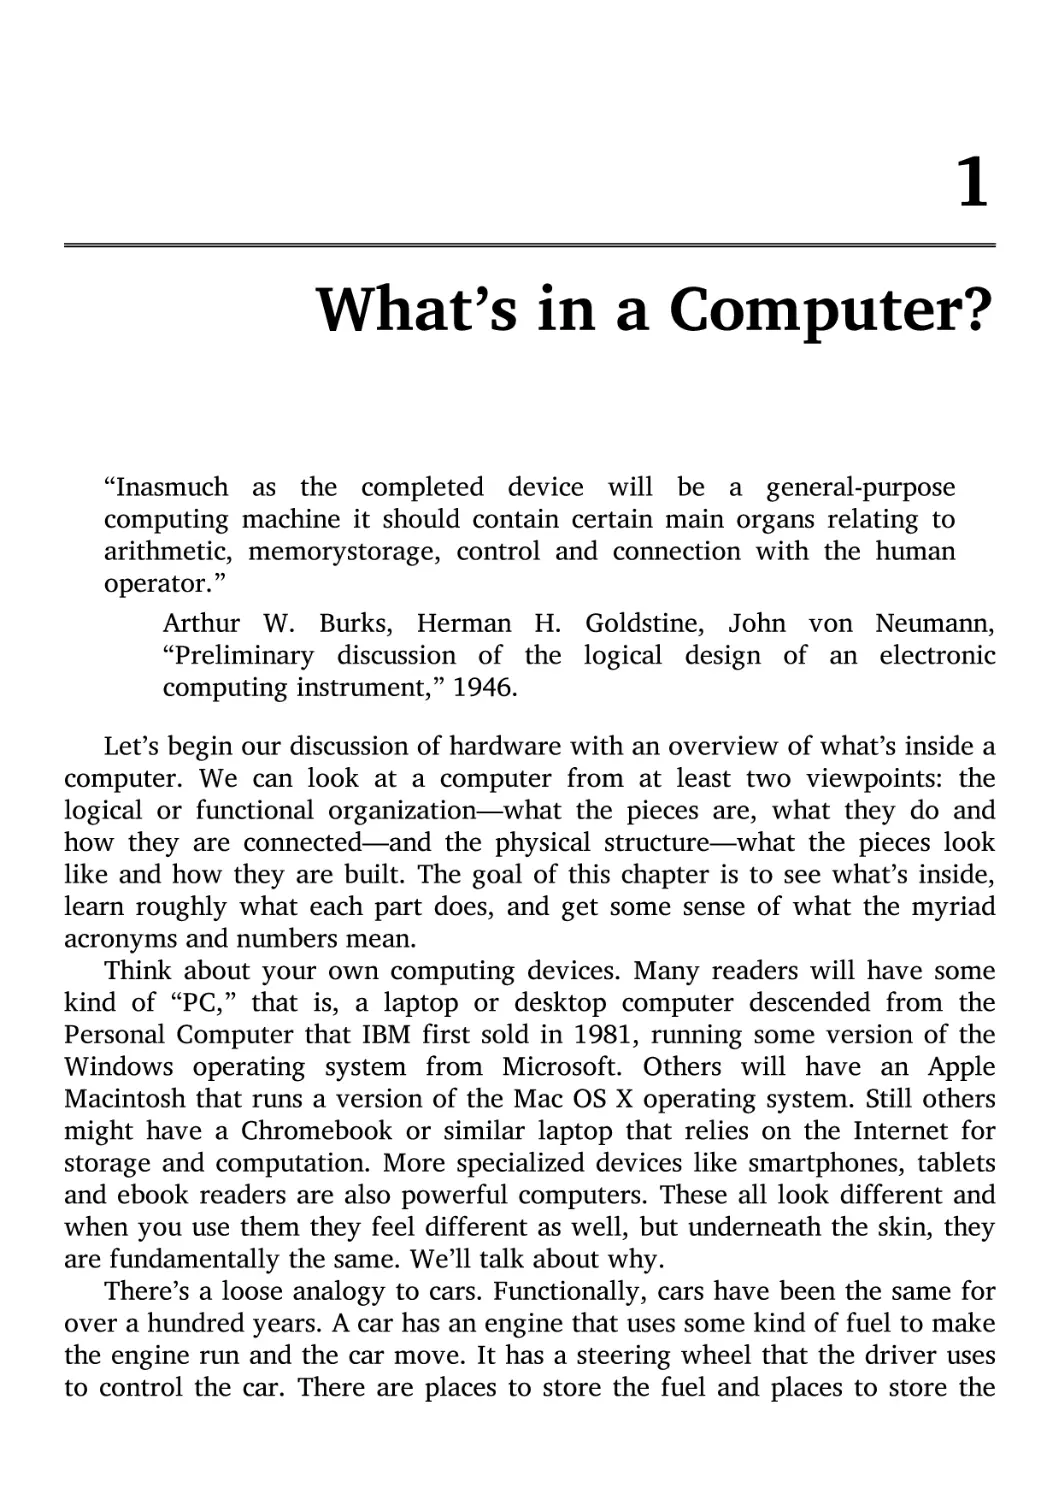 1. What’s in a Computer?